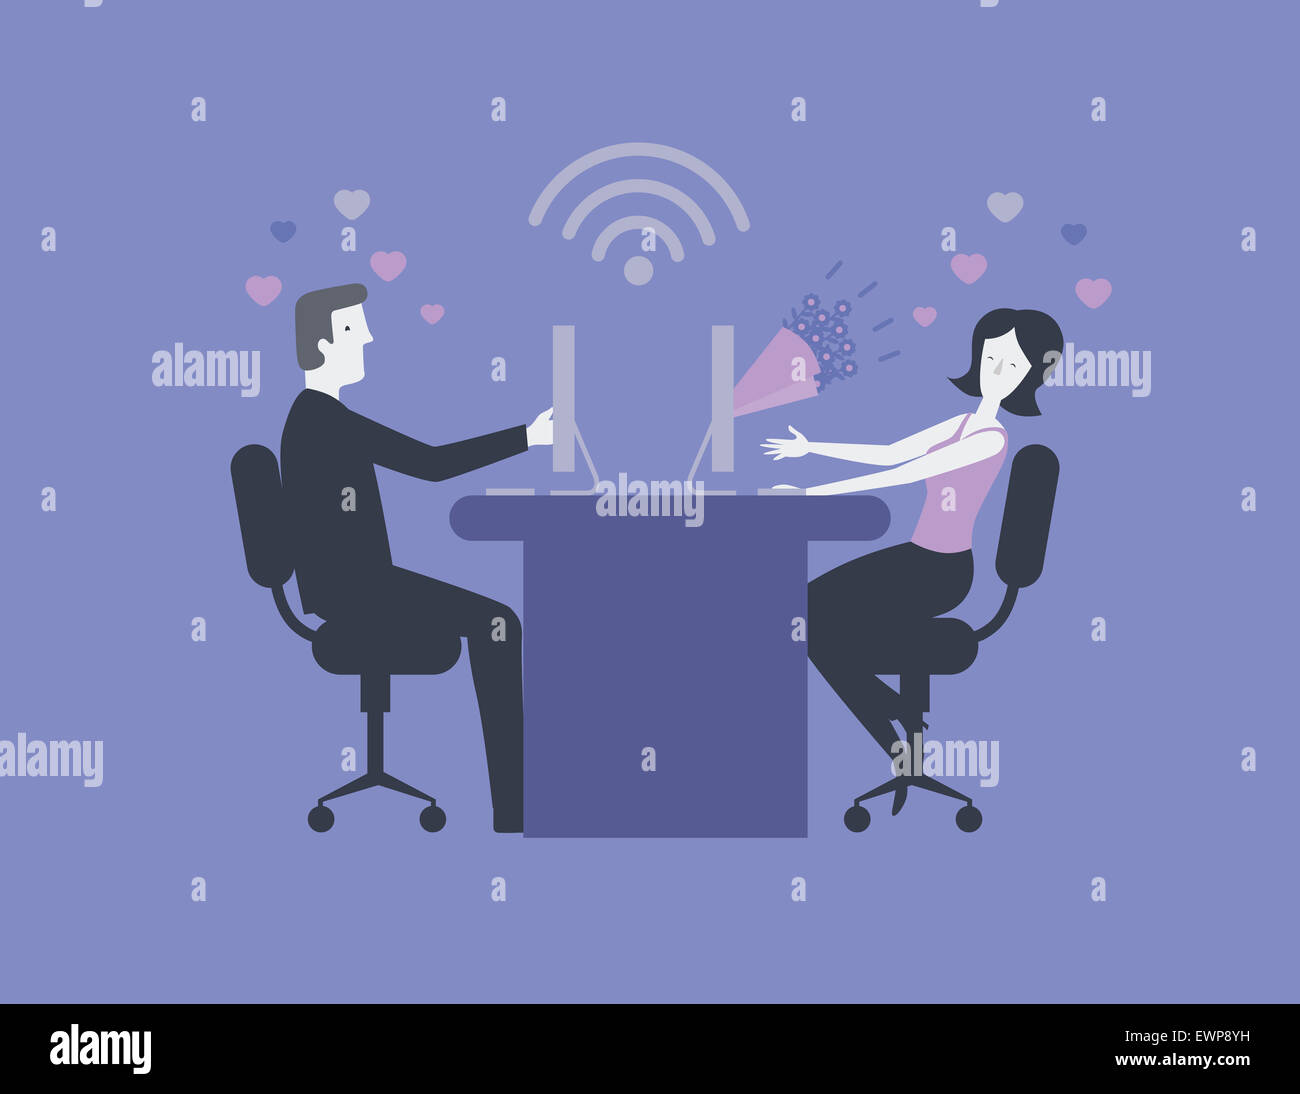 Illustration image of couple expressing their love for each other online Stock Photo